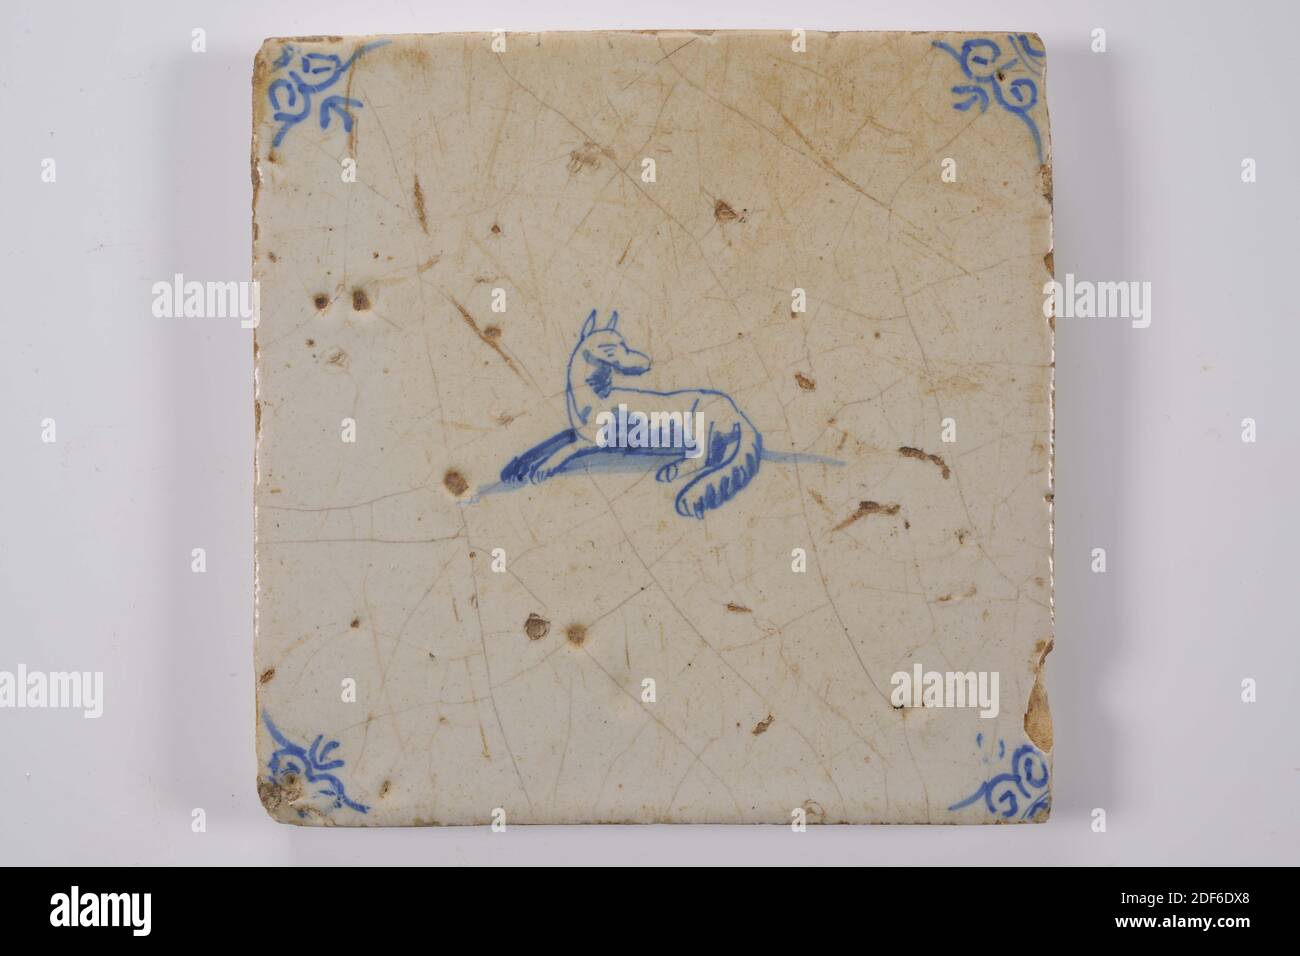 wall tile, Anonymous, between 1640-1700, tin glaze, earthenware, General: 13.2 x 13.4 x 1.2cm (132 x 134 x 12mm), dog, wolf, Earthenware wall tile covered in tin glaze and painted in blue. The tile shows a lying wolf or dog facing left, centrally. The tile has an ox head as a corner motif, 1995 Stock Photo